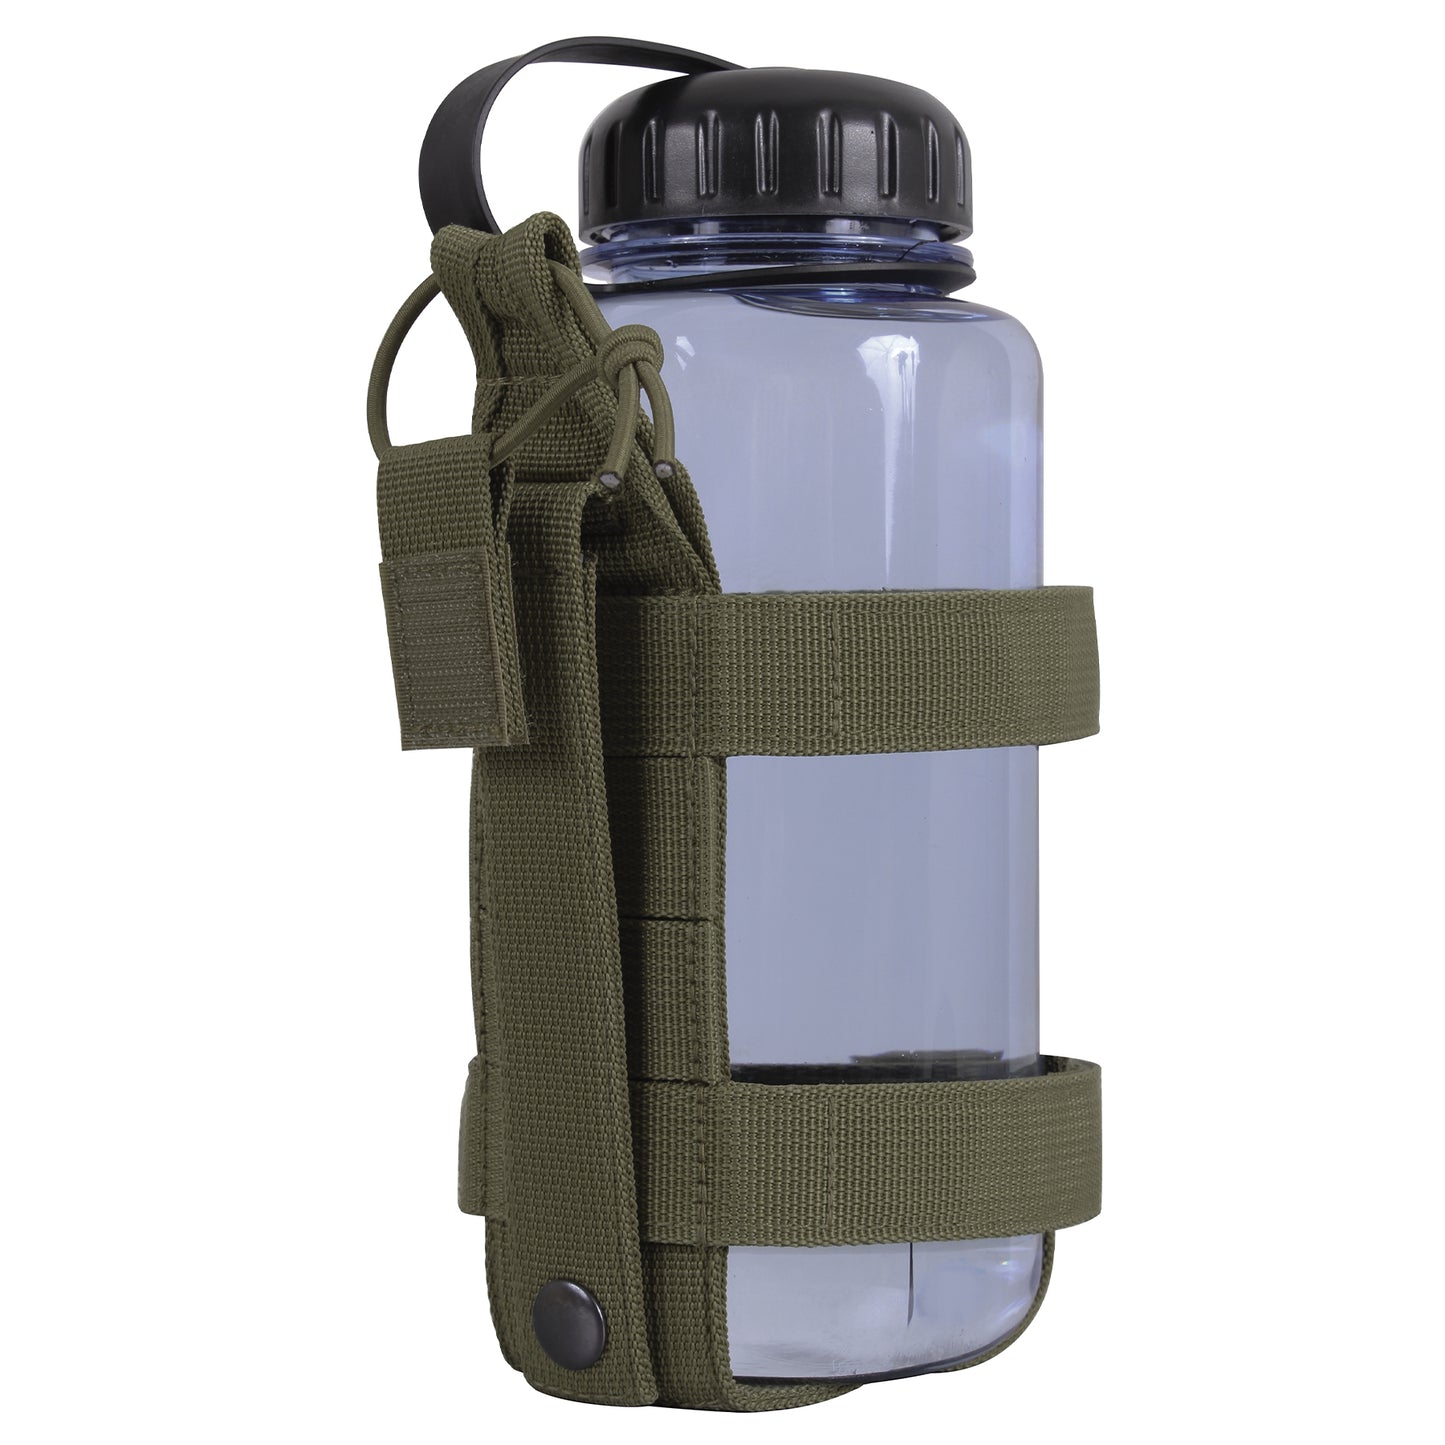 Rothco Olive Drab Lightweight MOLLE Compatible Water Bottle Carrier